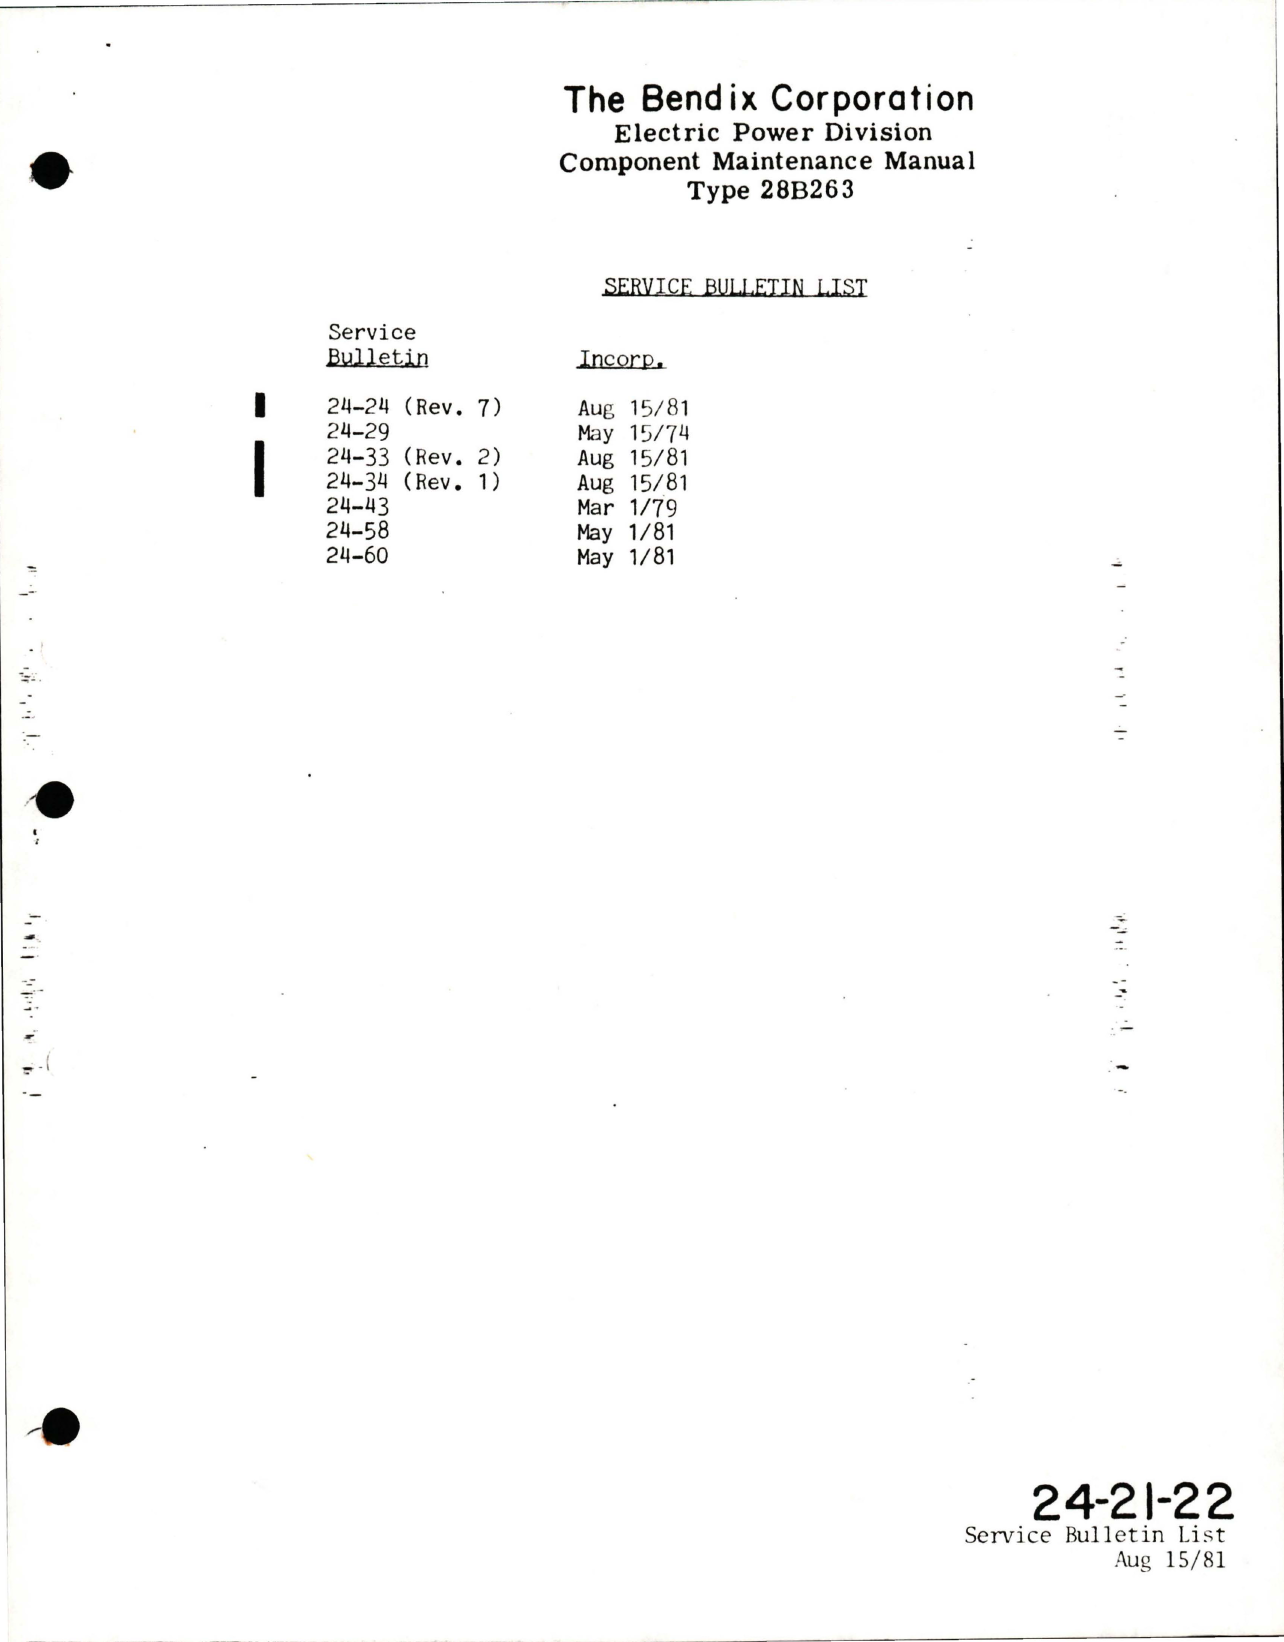 Sample page 5 from AirCorps Library document: Maintenance Manual for Alternating Current Generator - Type 28B263-13-A and 28B263-13-B